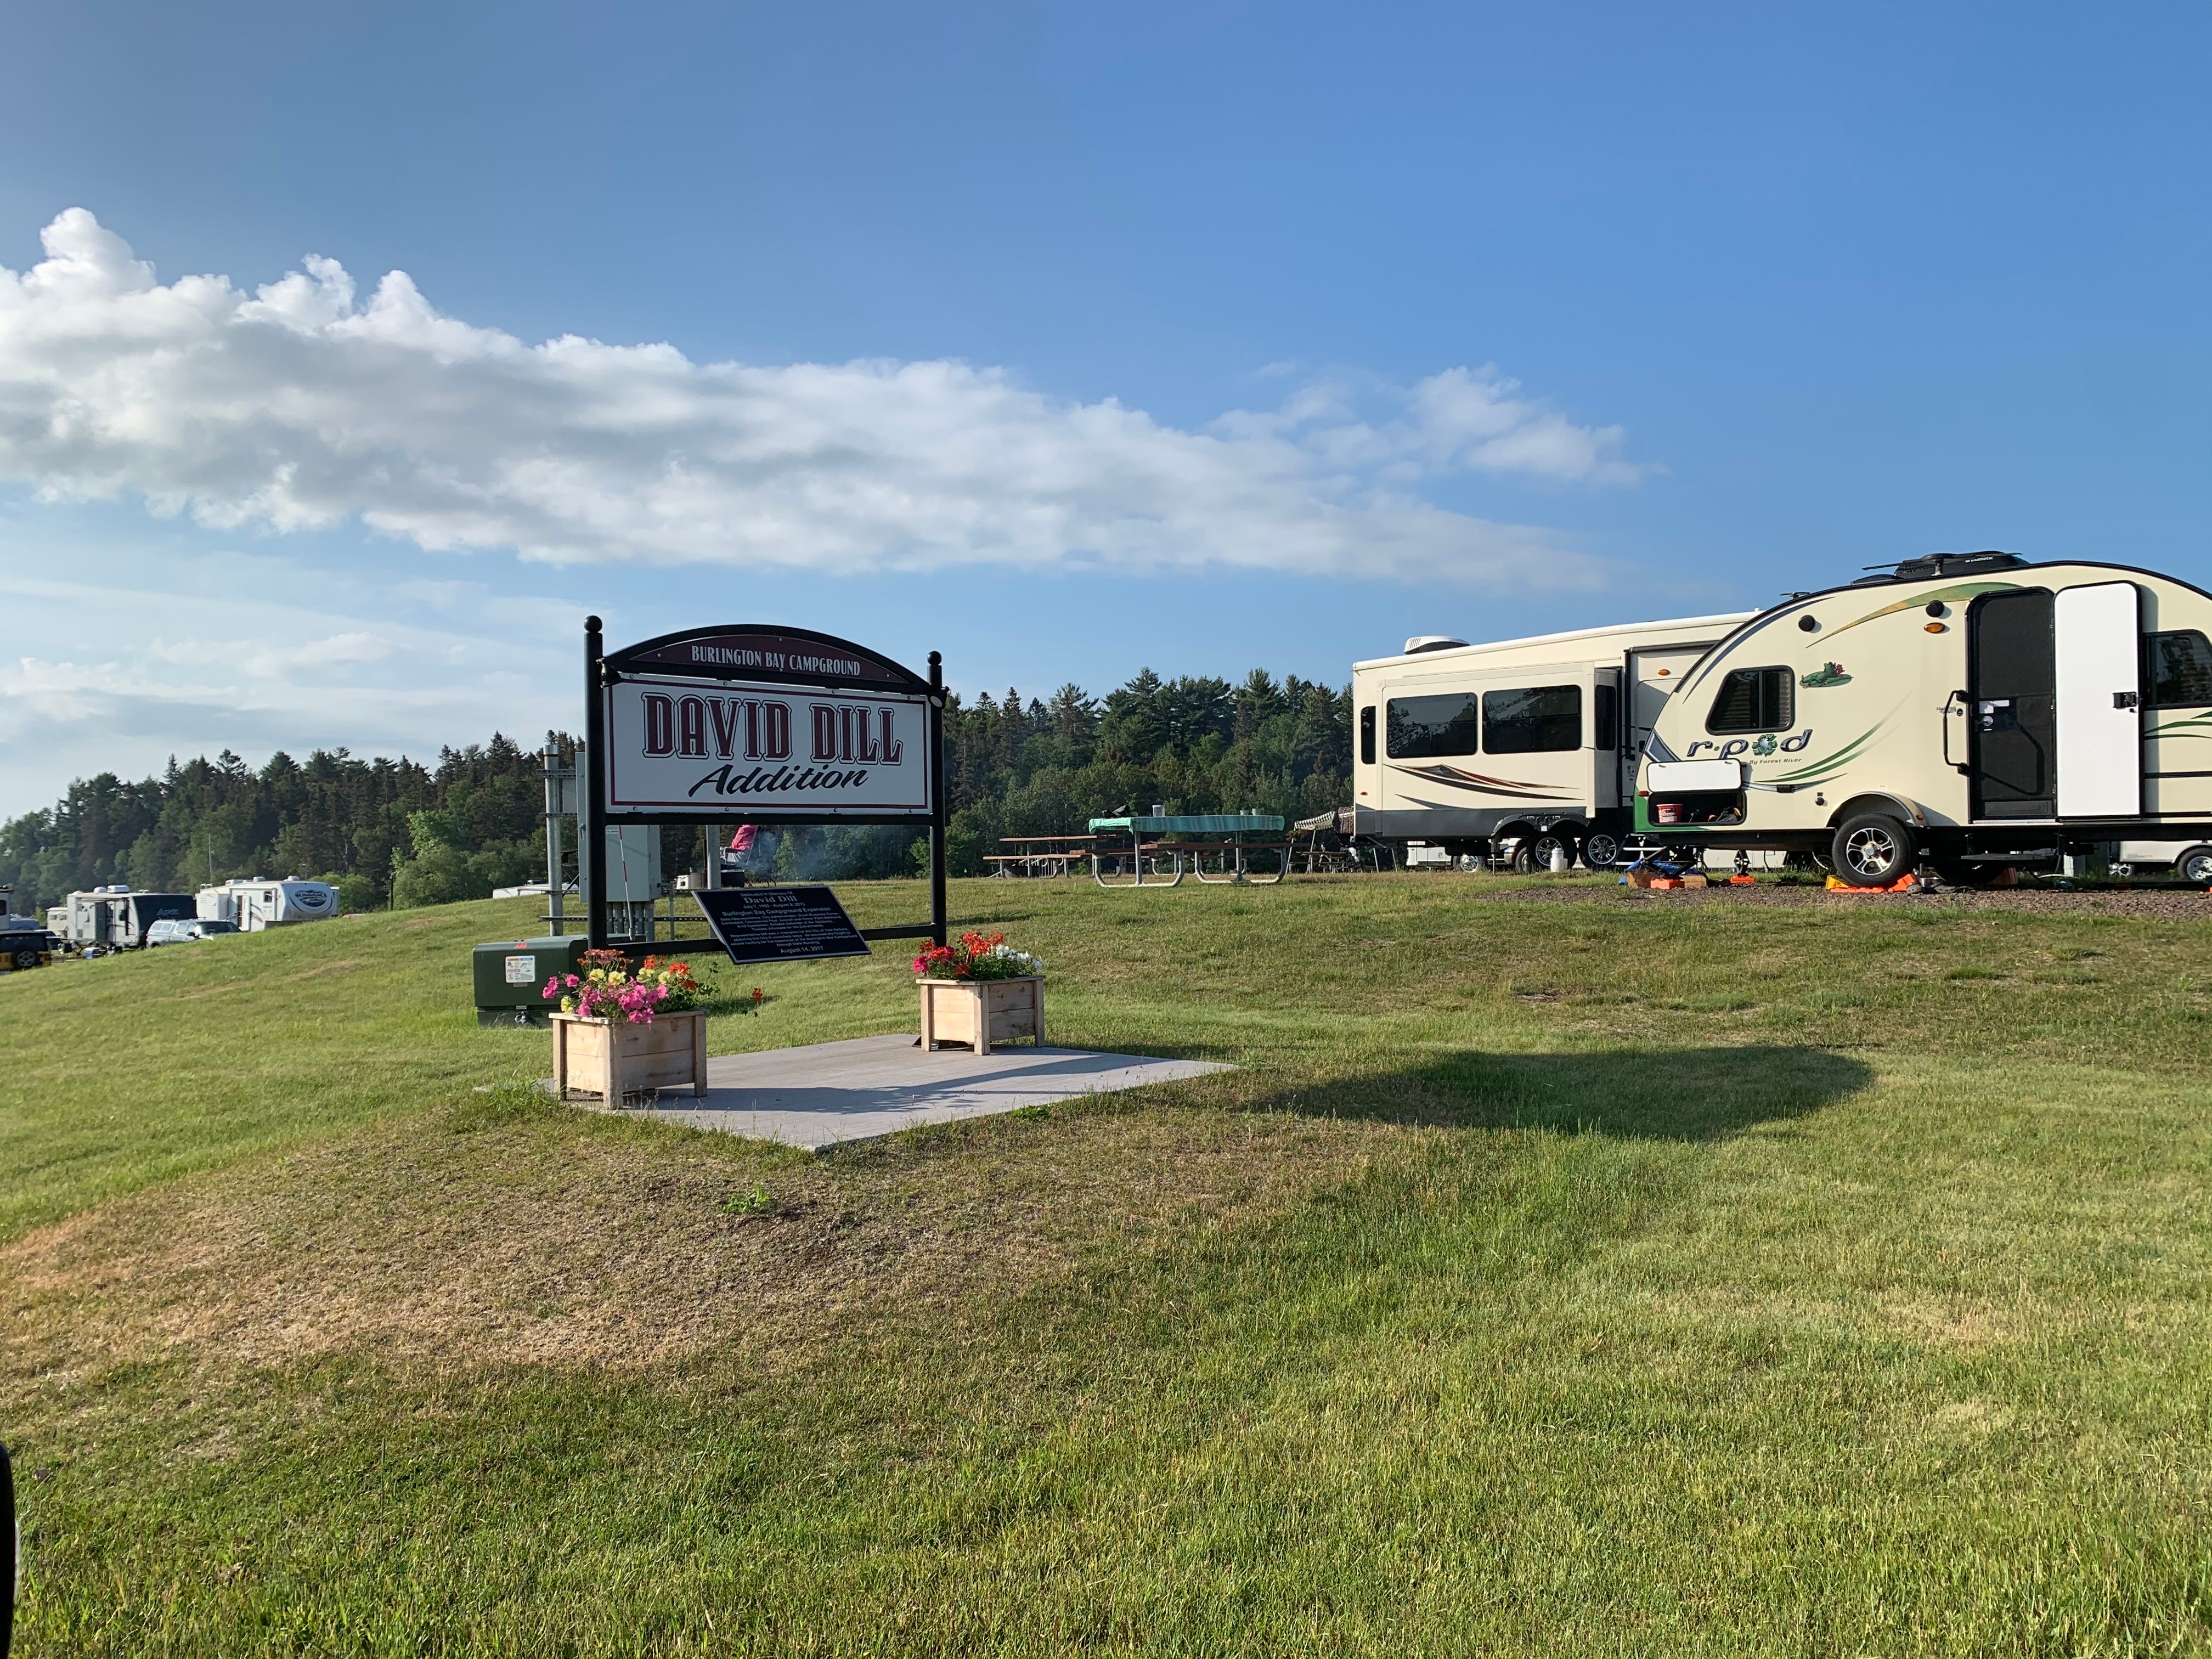 Camper submitted image from City of Two Harbors Burlington BayCampground David Hill Addition  - 5